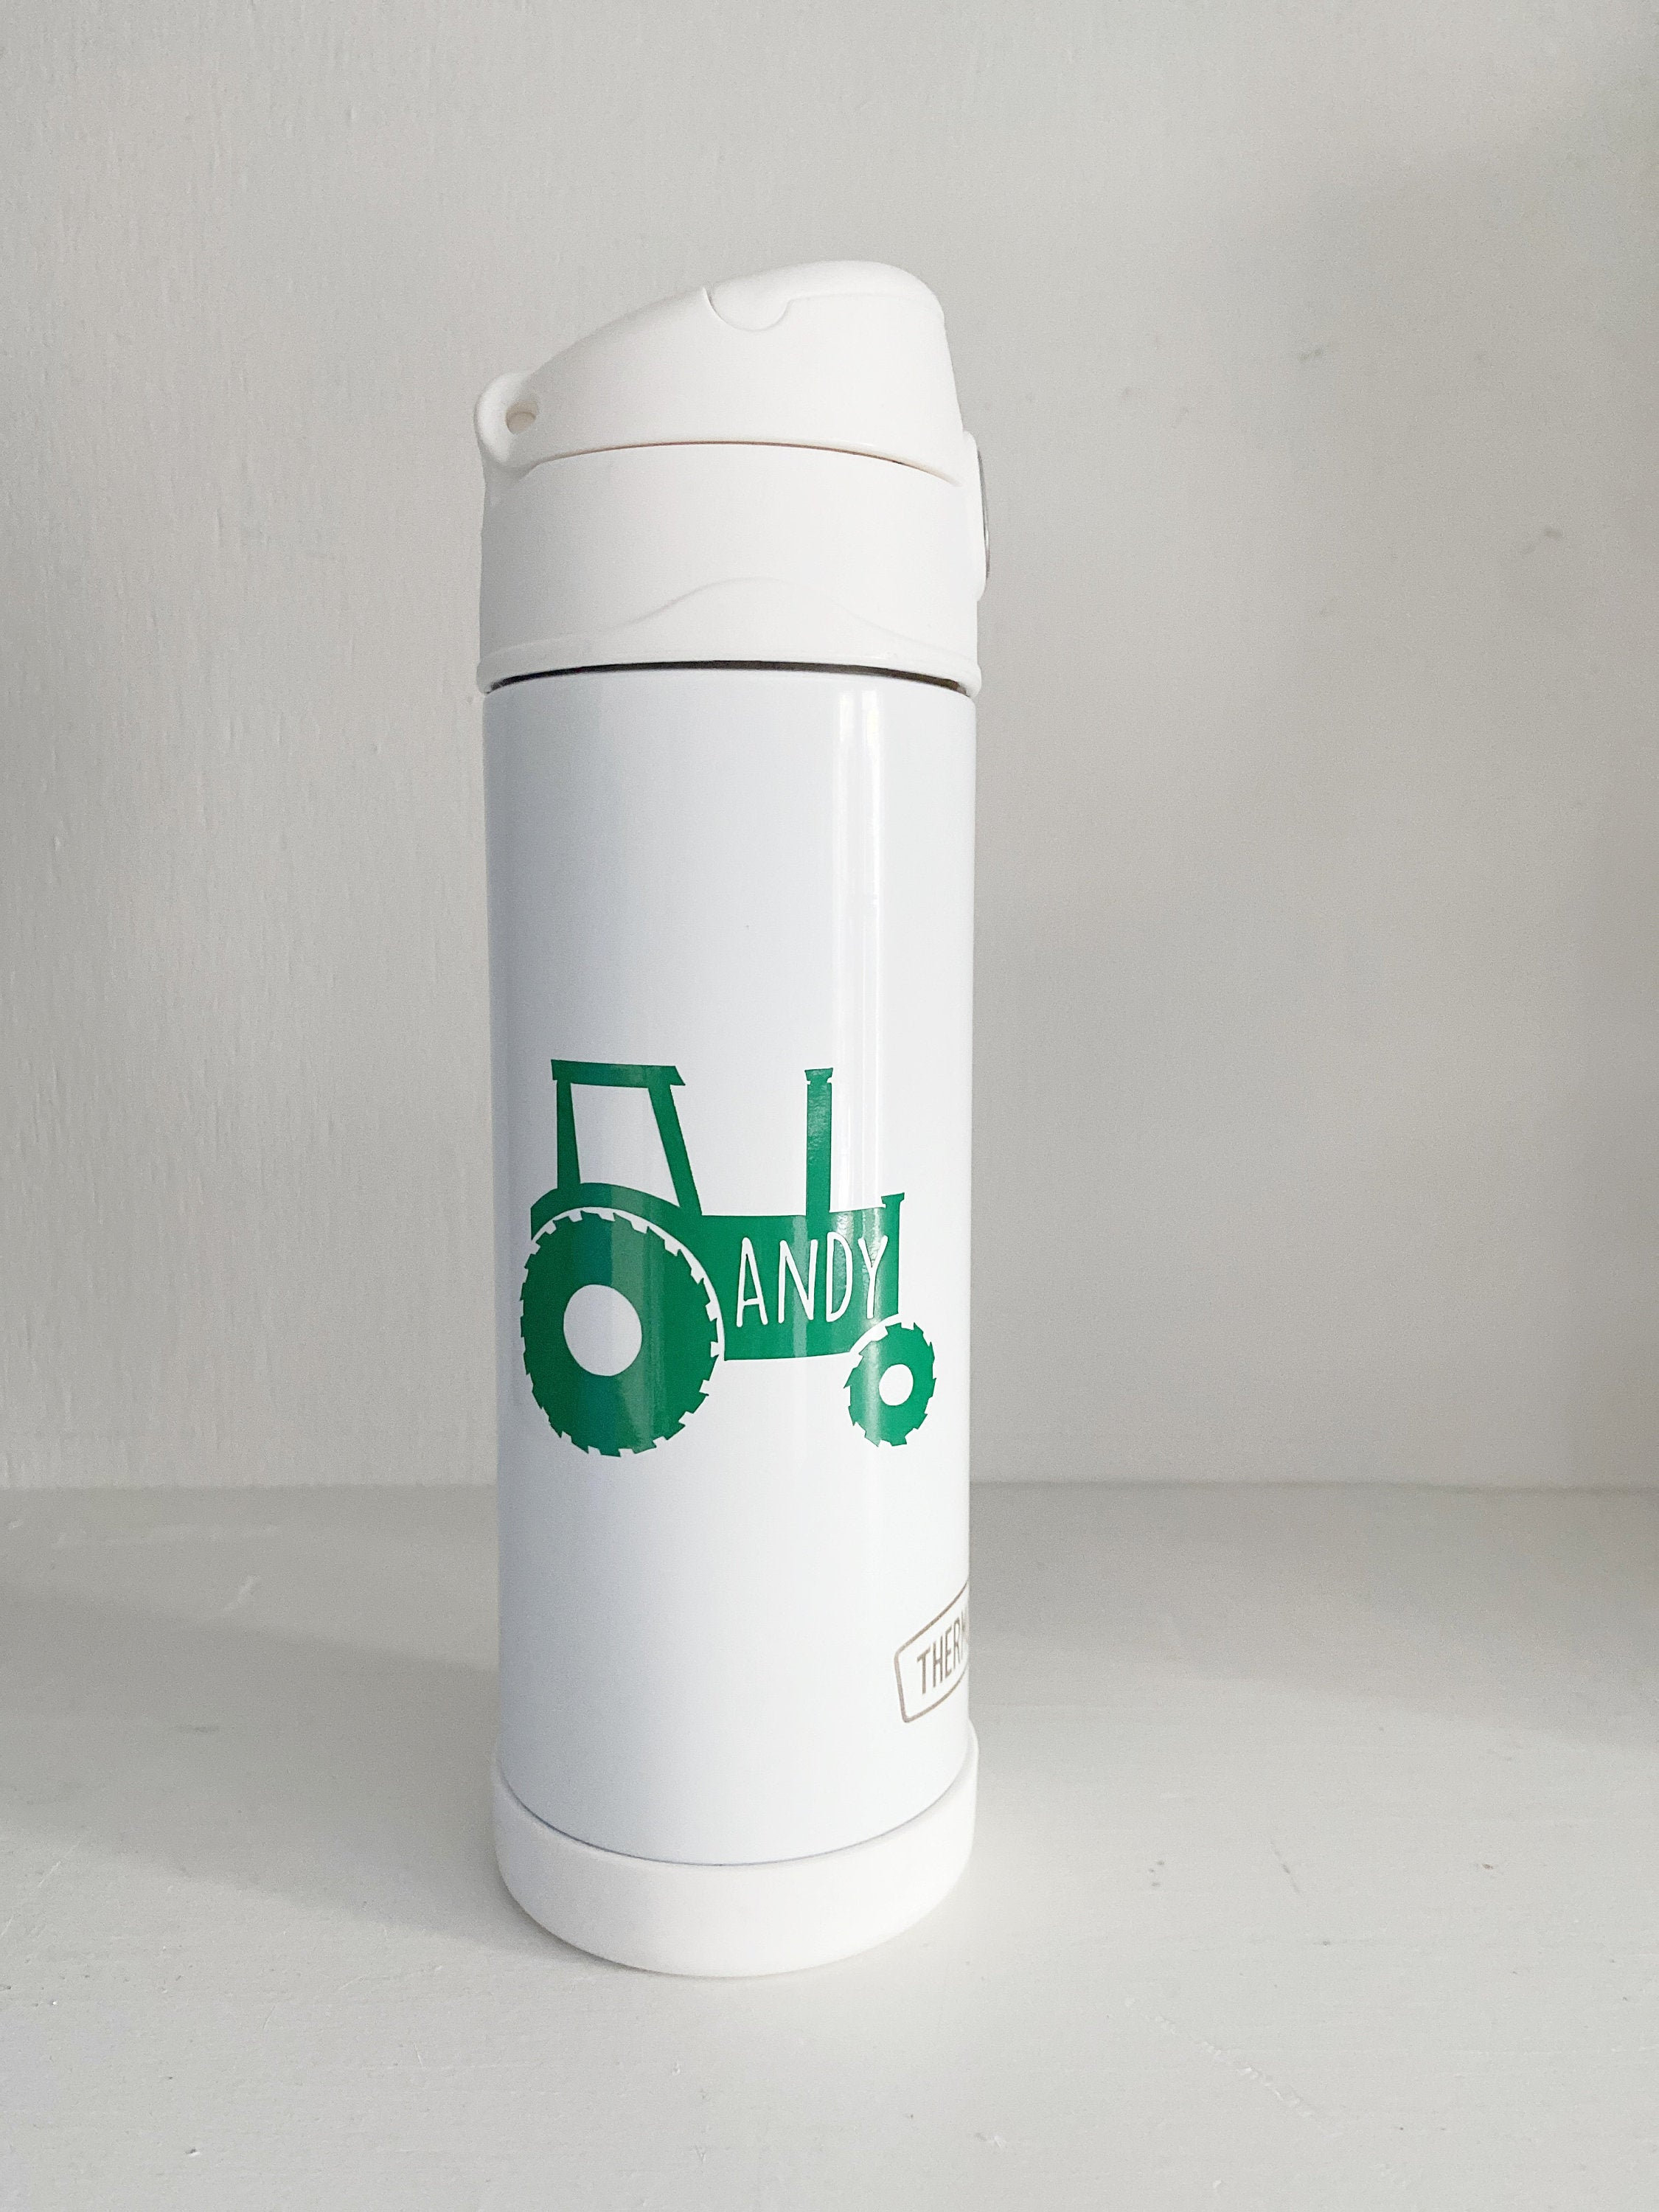 Contigo Water Bottle for Kids Decal, Dinosaur Decal , Personalized